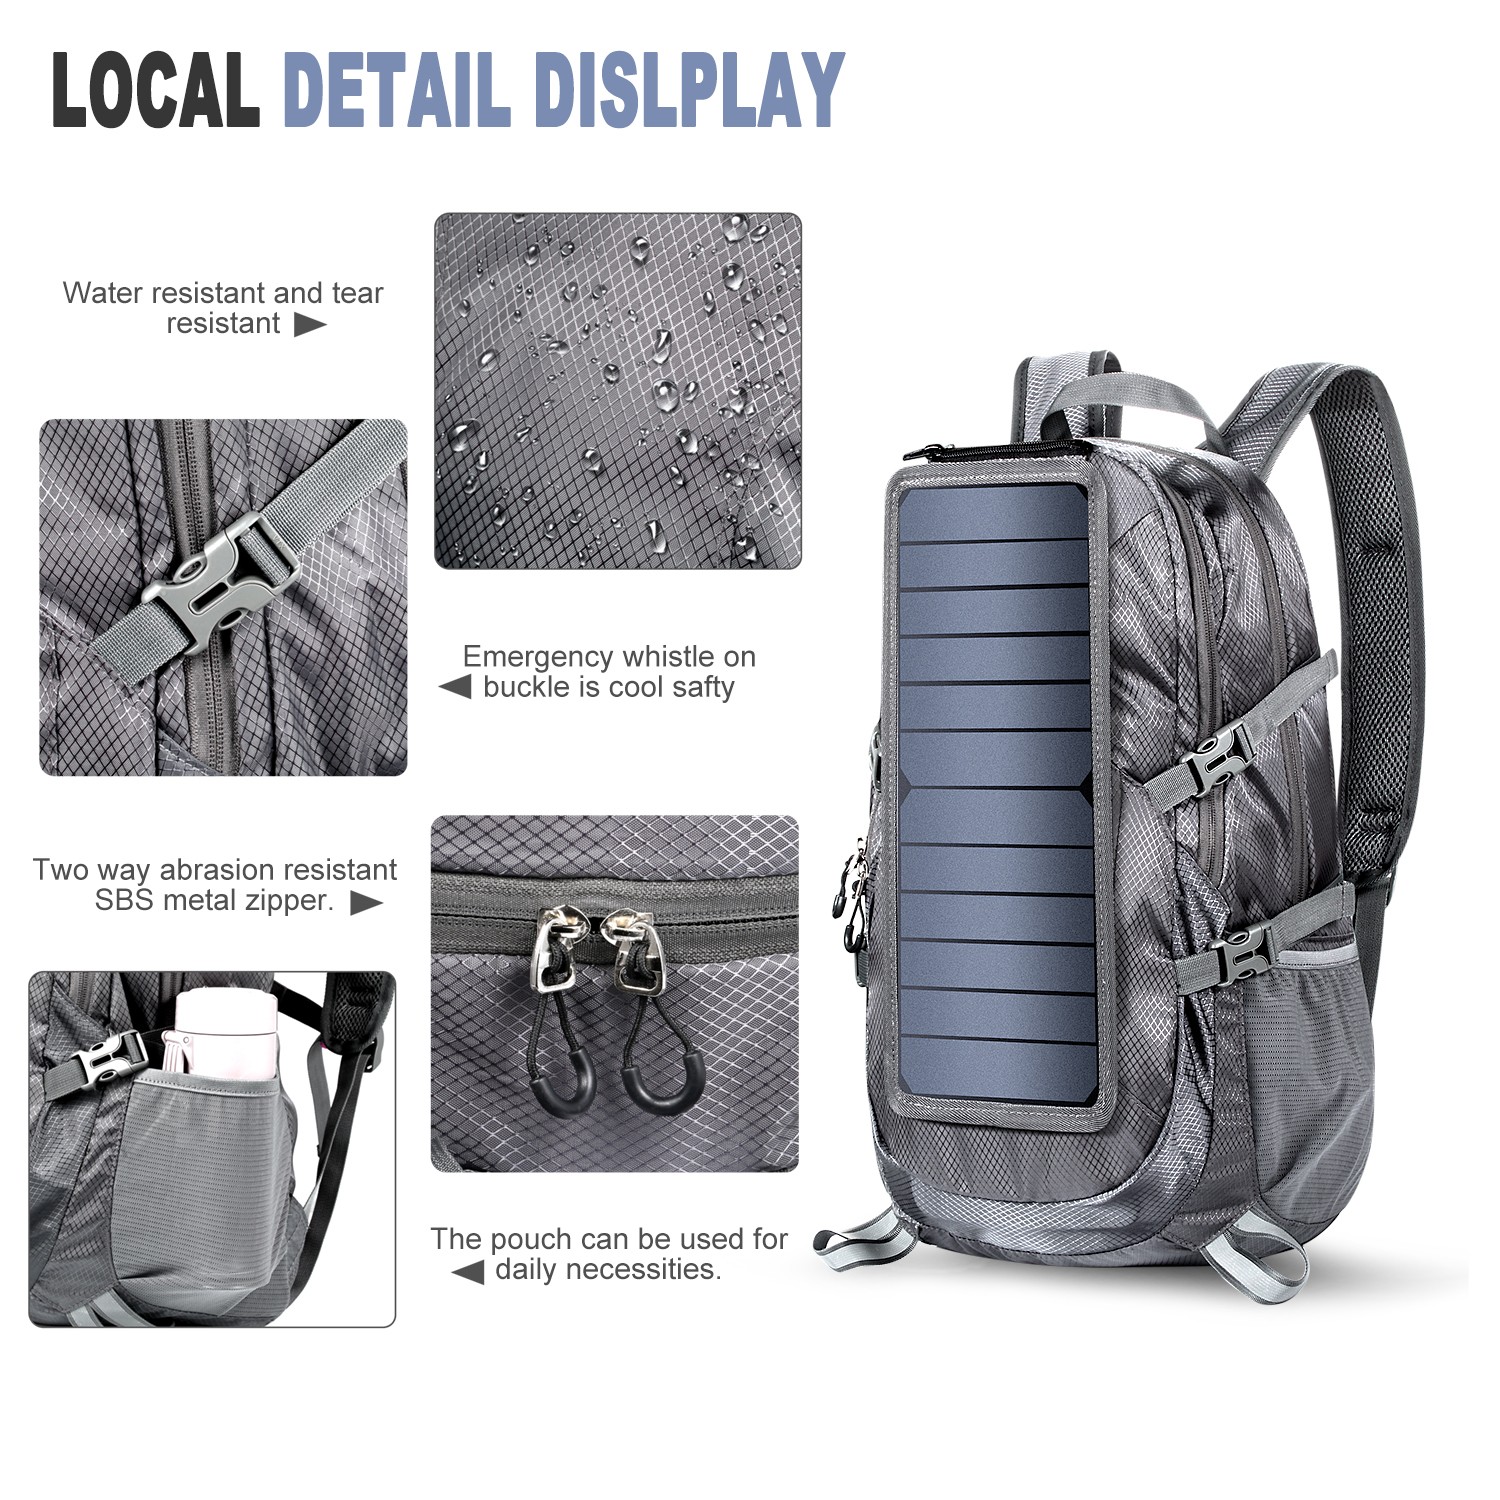 Foldable solar panel backpack camping bag with 5V power supply 6.5W solar panel for charging mobile phones